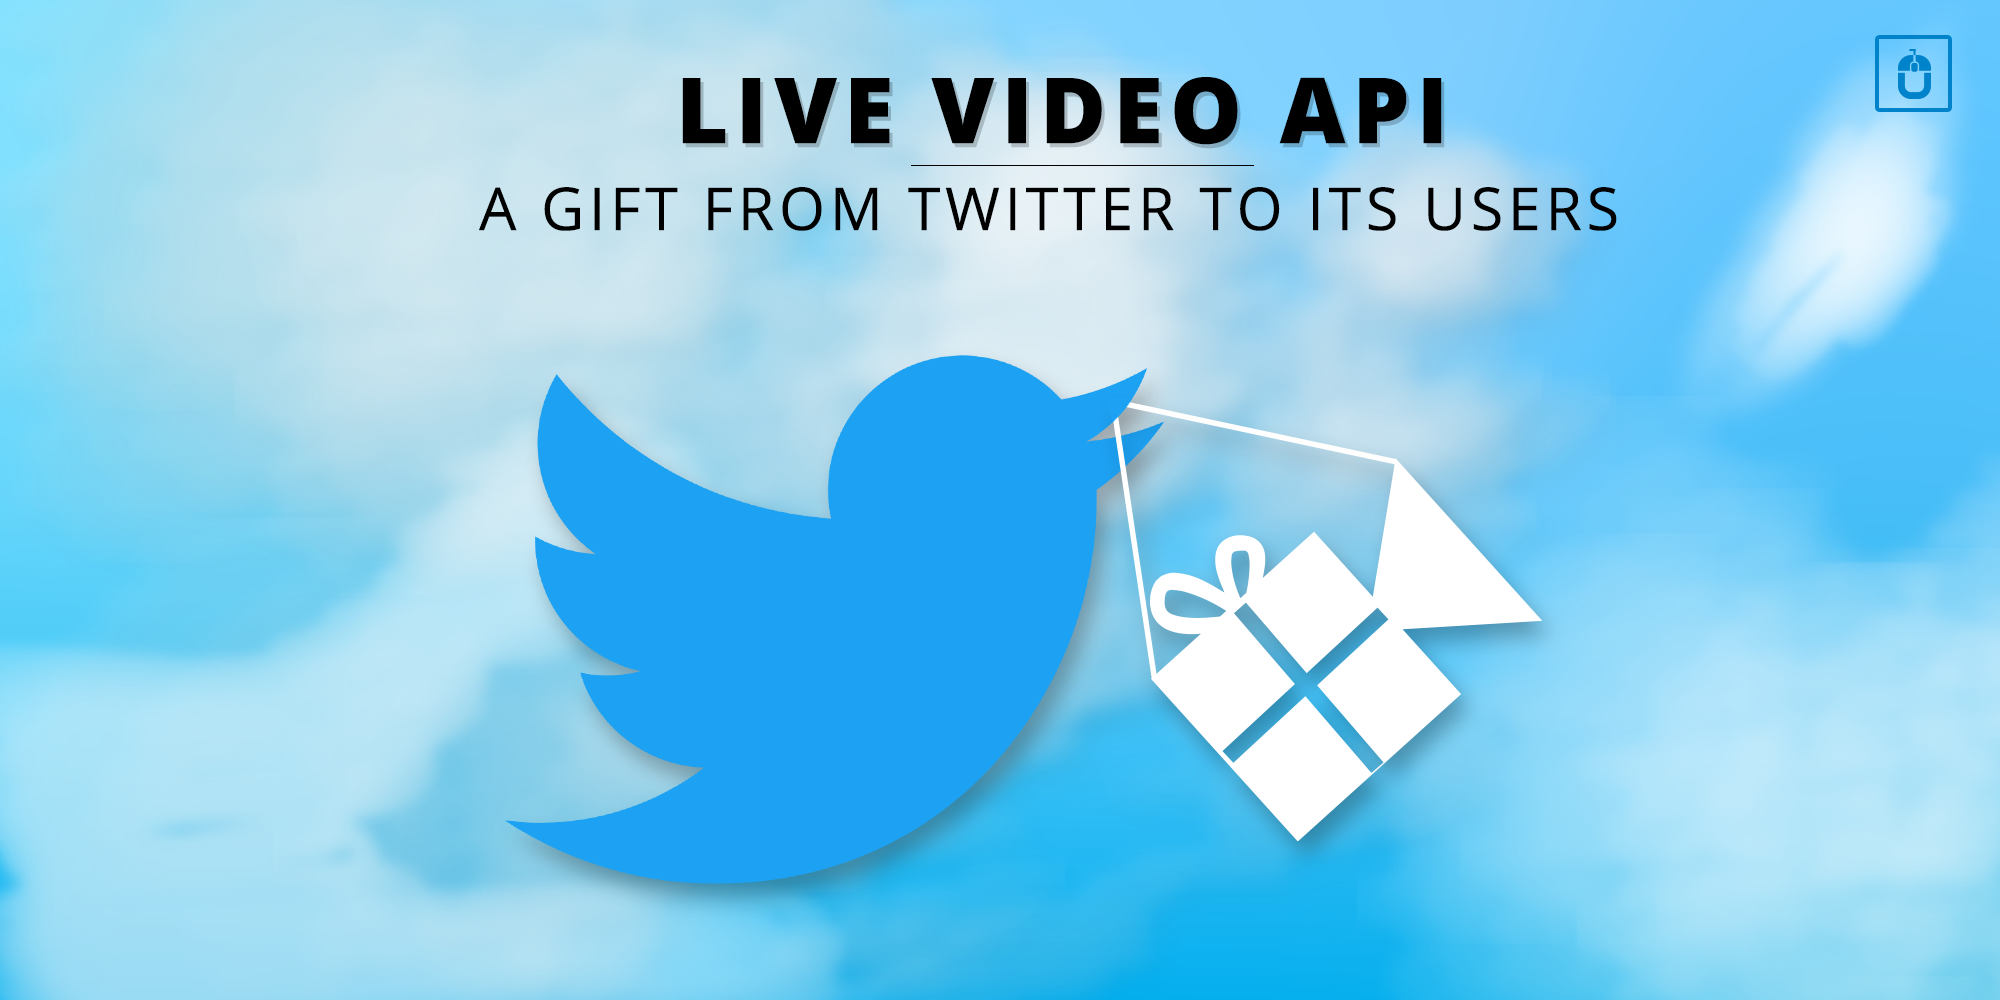 LIVE VIDEO API – A GIFT FROM TWITTER TO ITS USERS